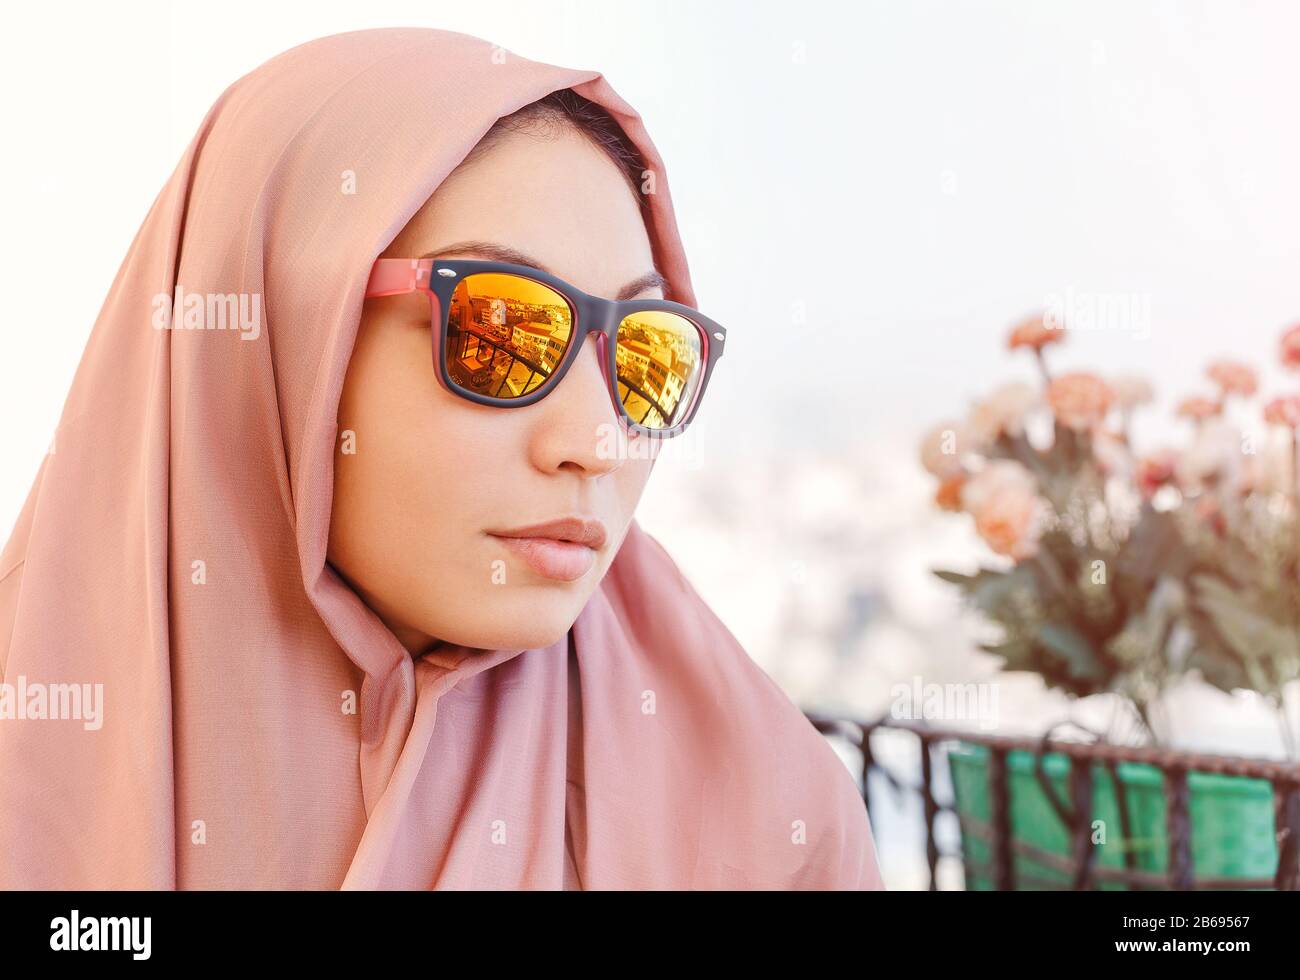 Muslim Woman wearing head scarf and sunglasses with city reflections Stock Photo